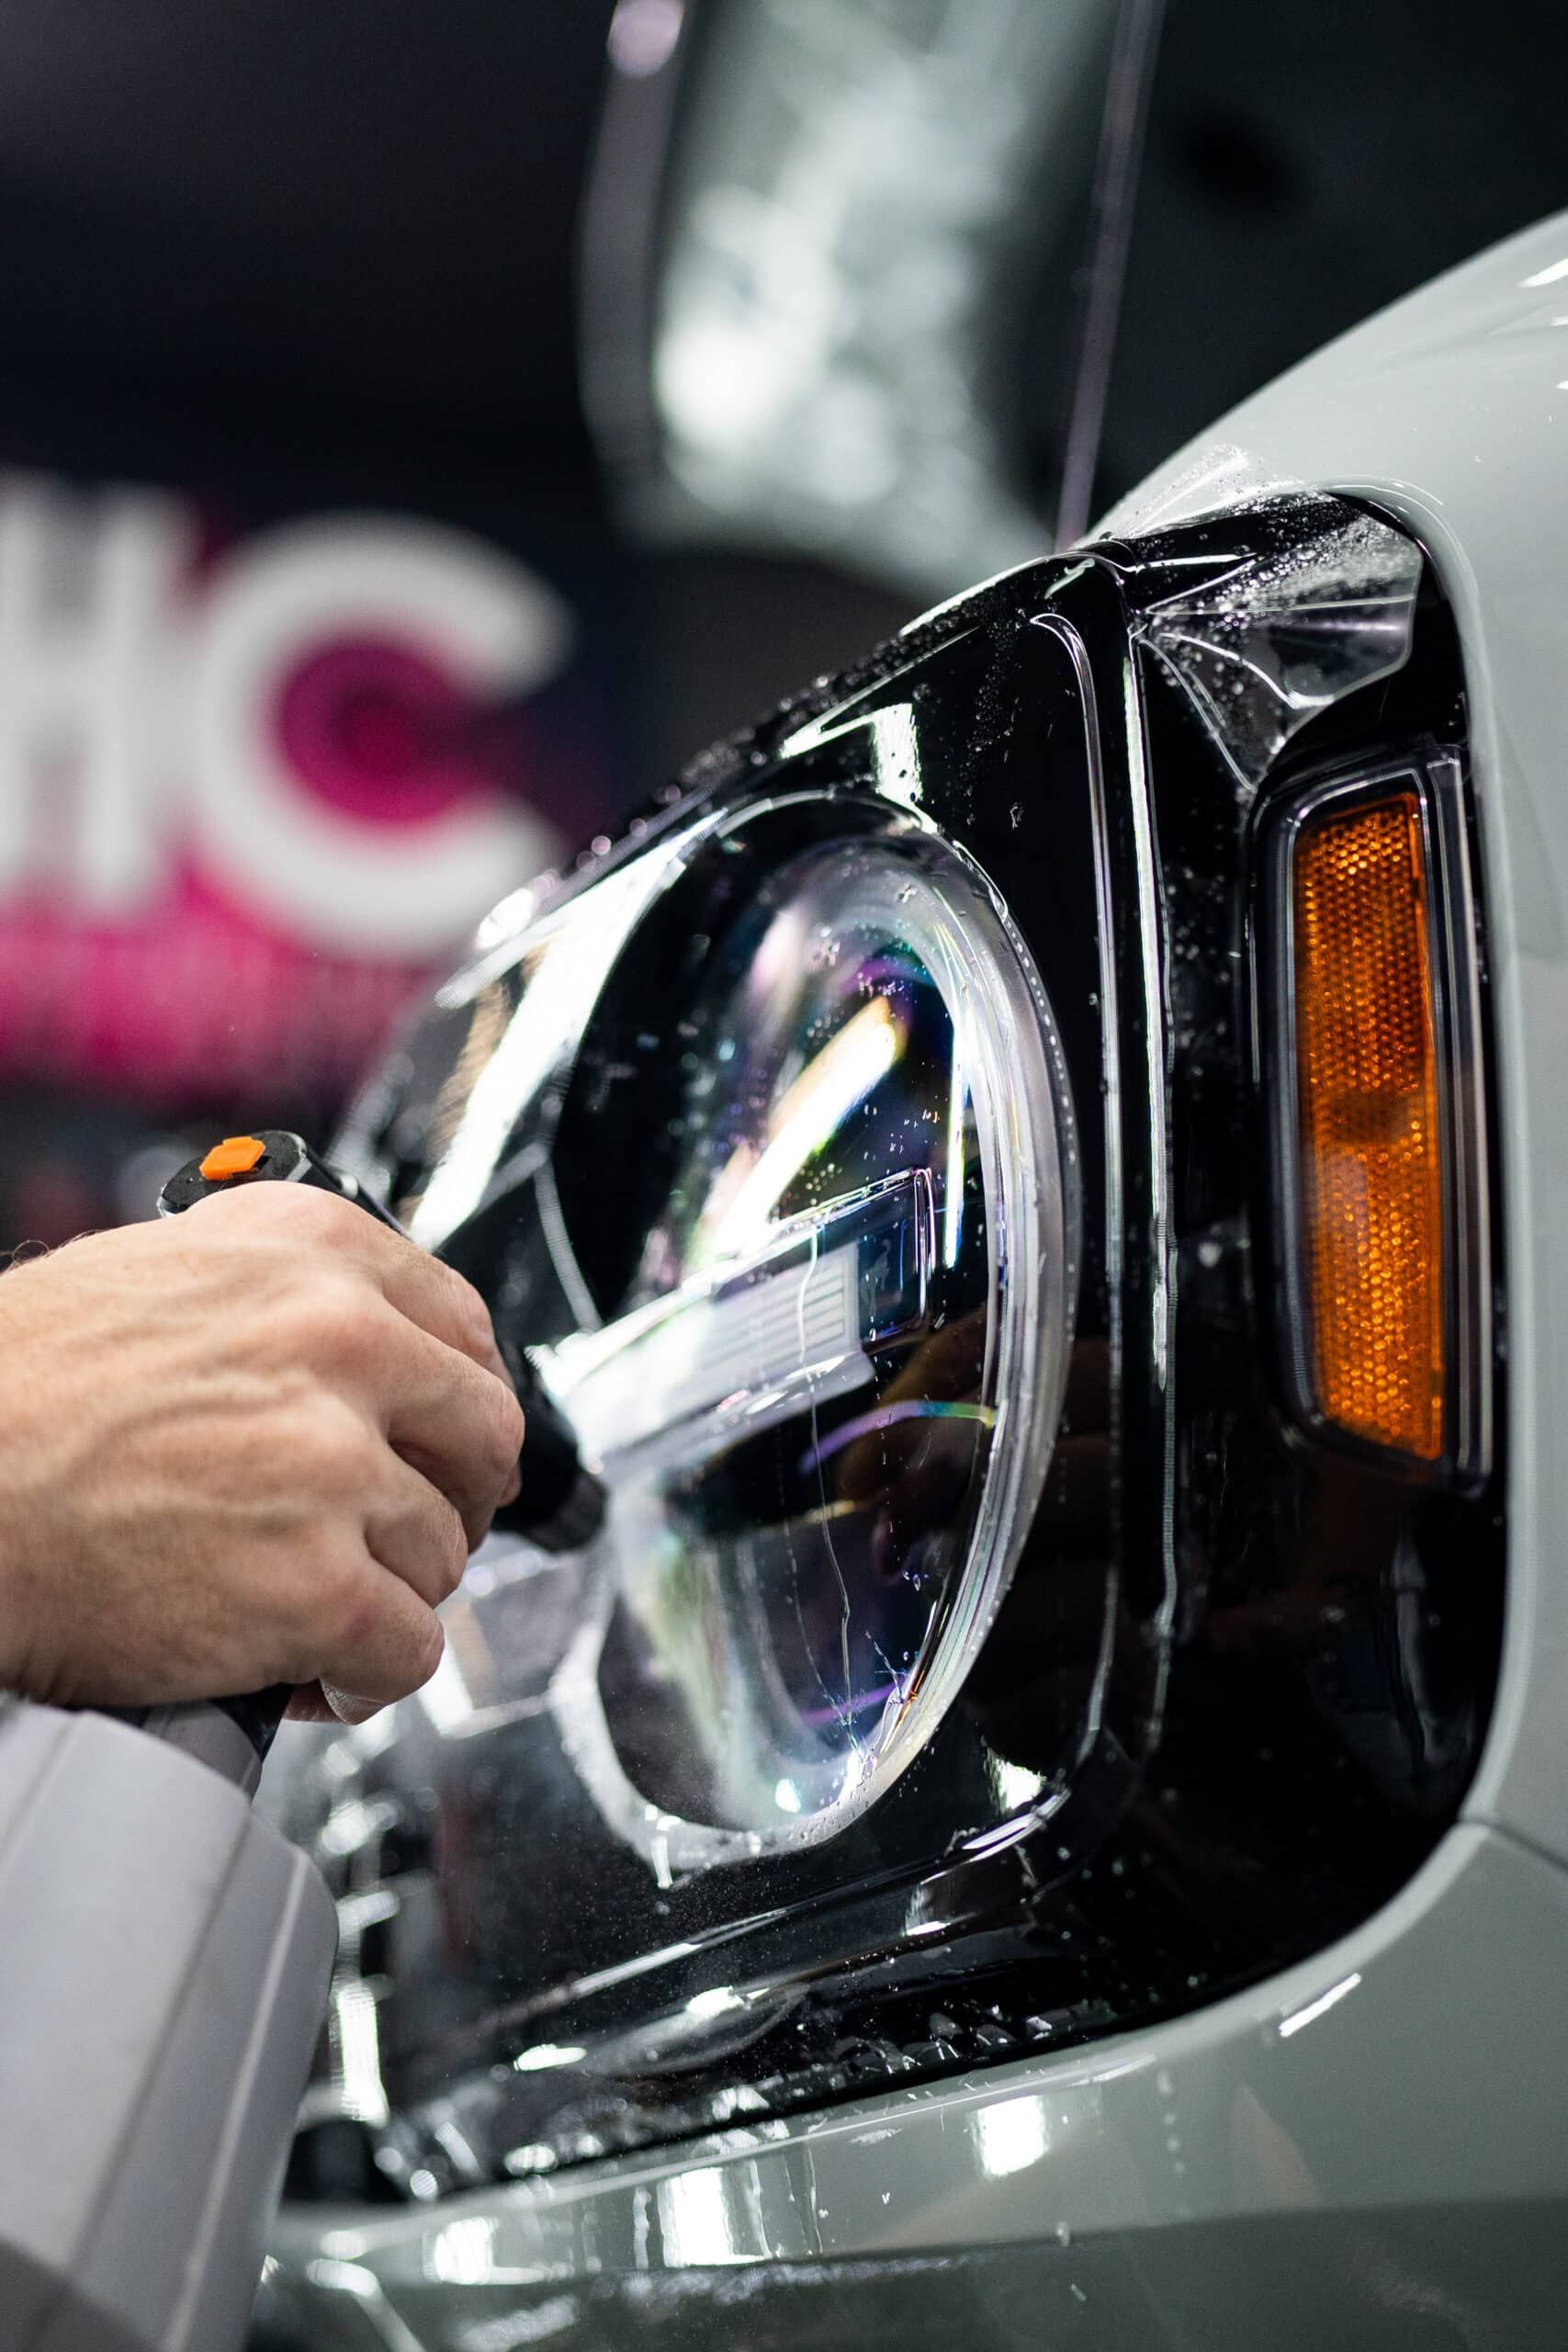 A person is applying a protective film to the headlight of a car.